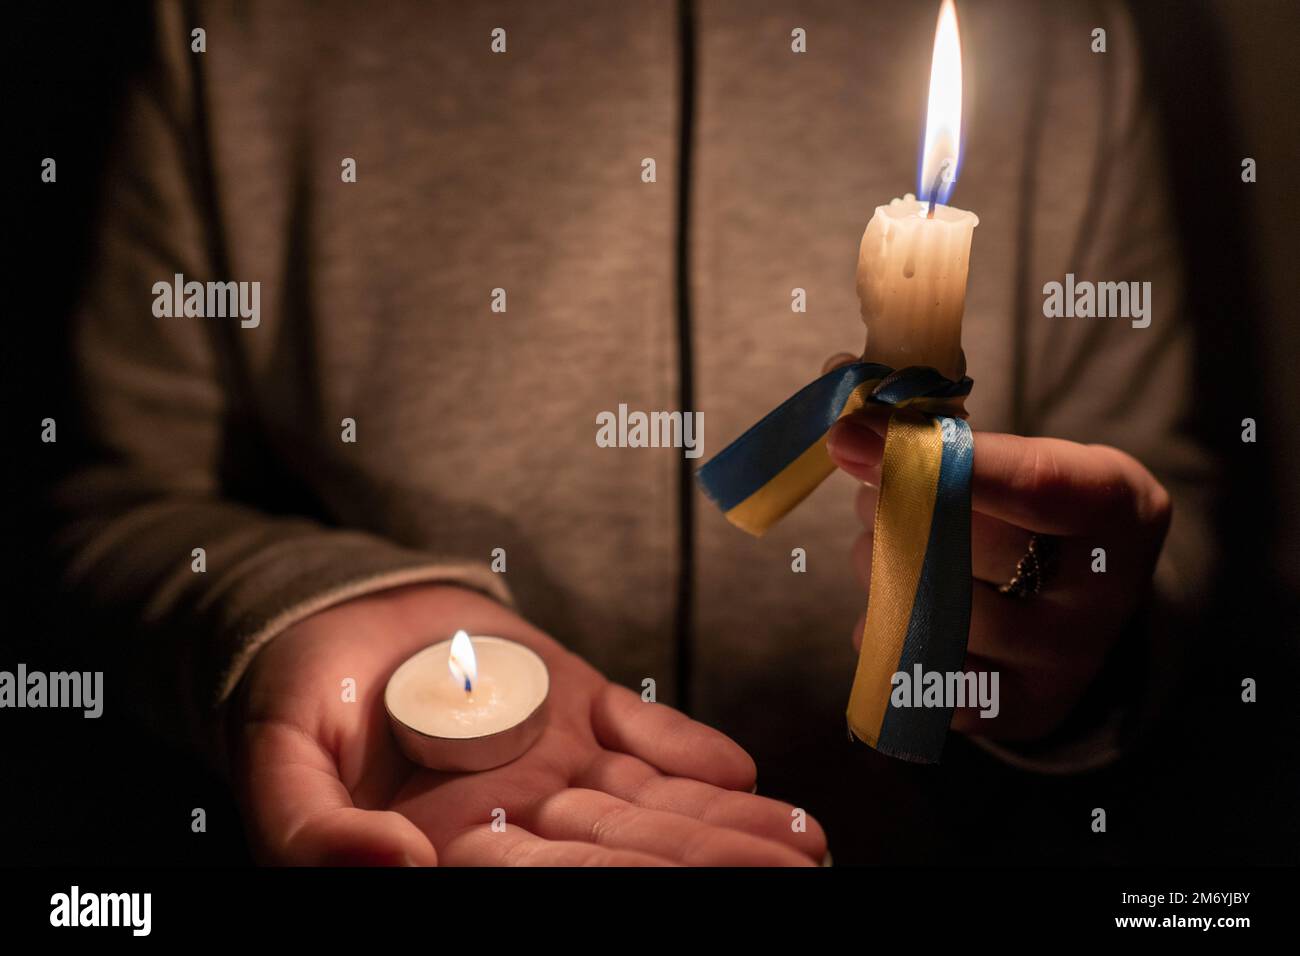 https://c8.alamy.com/comp/2M6YJBY/blackout-energy-crisis-power-outage-concept-girl-holds-in-her-hands-two-burning-candles-with-a-yellow-blue-ribbon-the-national-symbol-of-ukraine-2M6YJBY.jpg